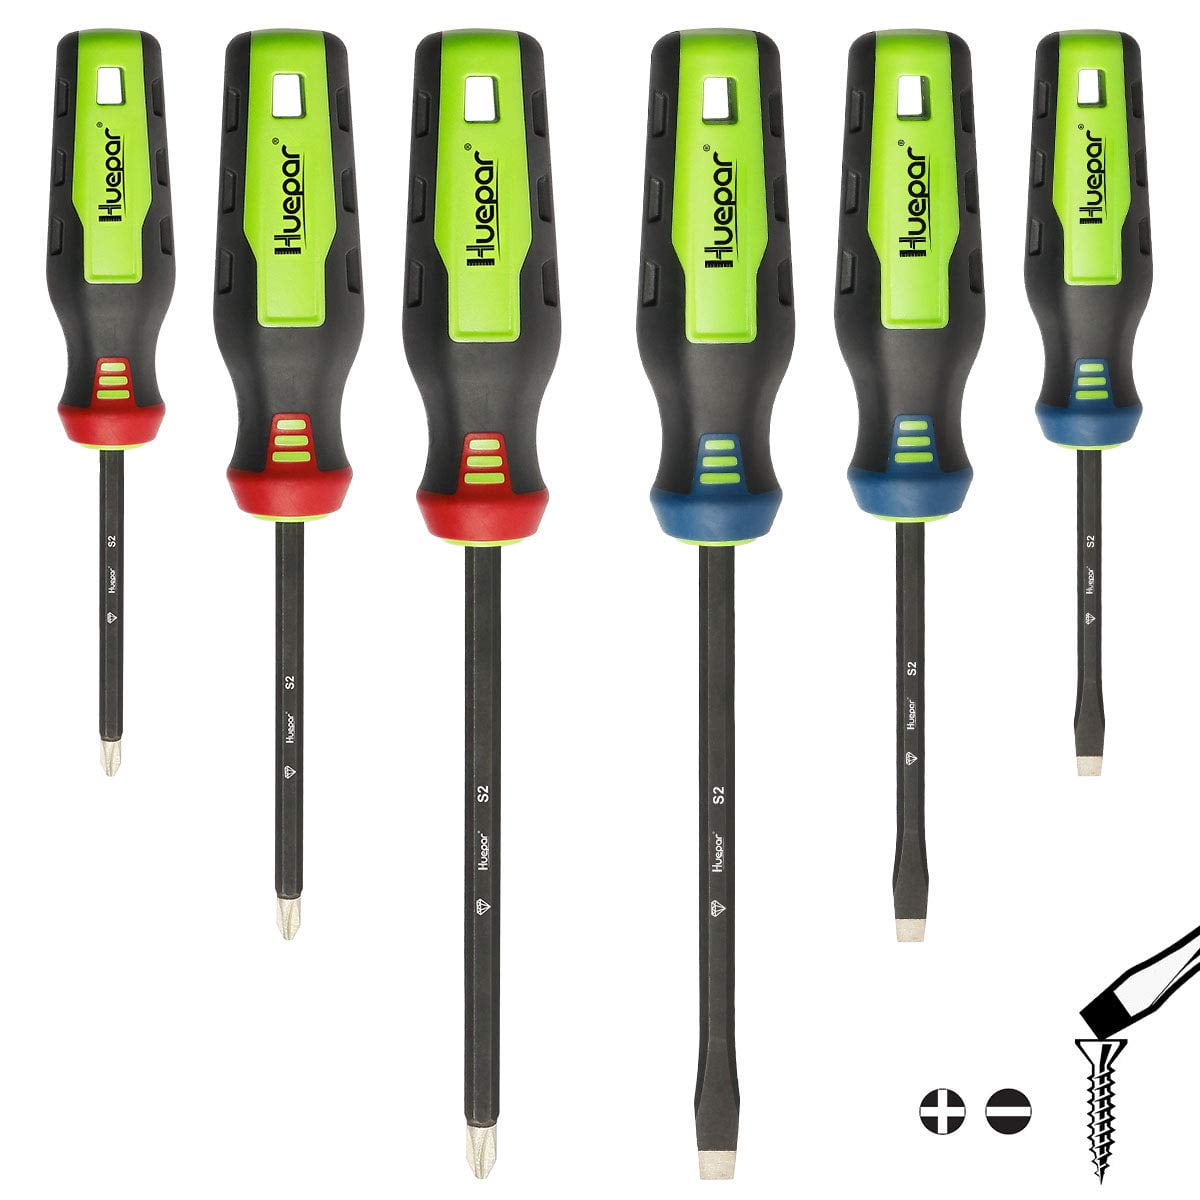 Color-Coded Non-Skid Handle for Repair Home Improvement Craft-SD06 Huepar Professional 3 Slotted and 3 Phillips Screwdriver Kit with Diamond Tip Magnetic Screwdriver Set 6PCS Rust Resistant Shaft 